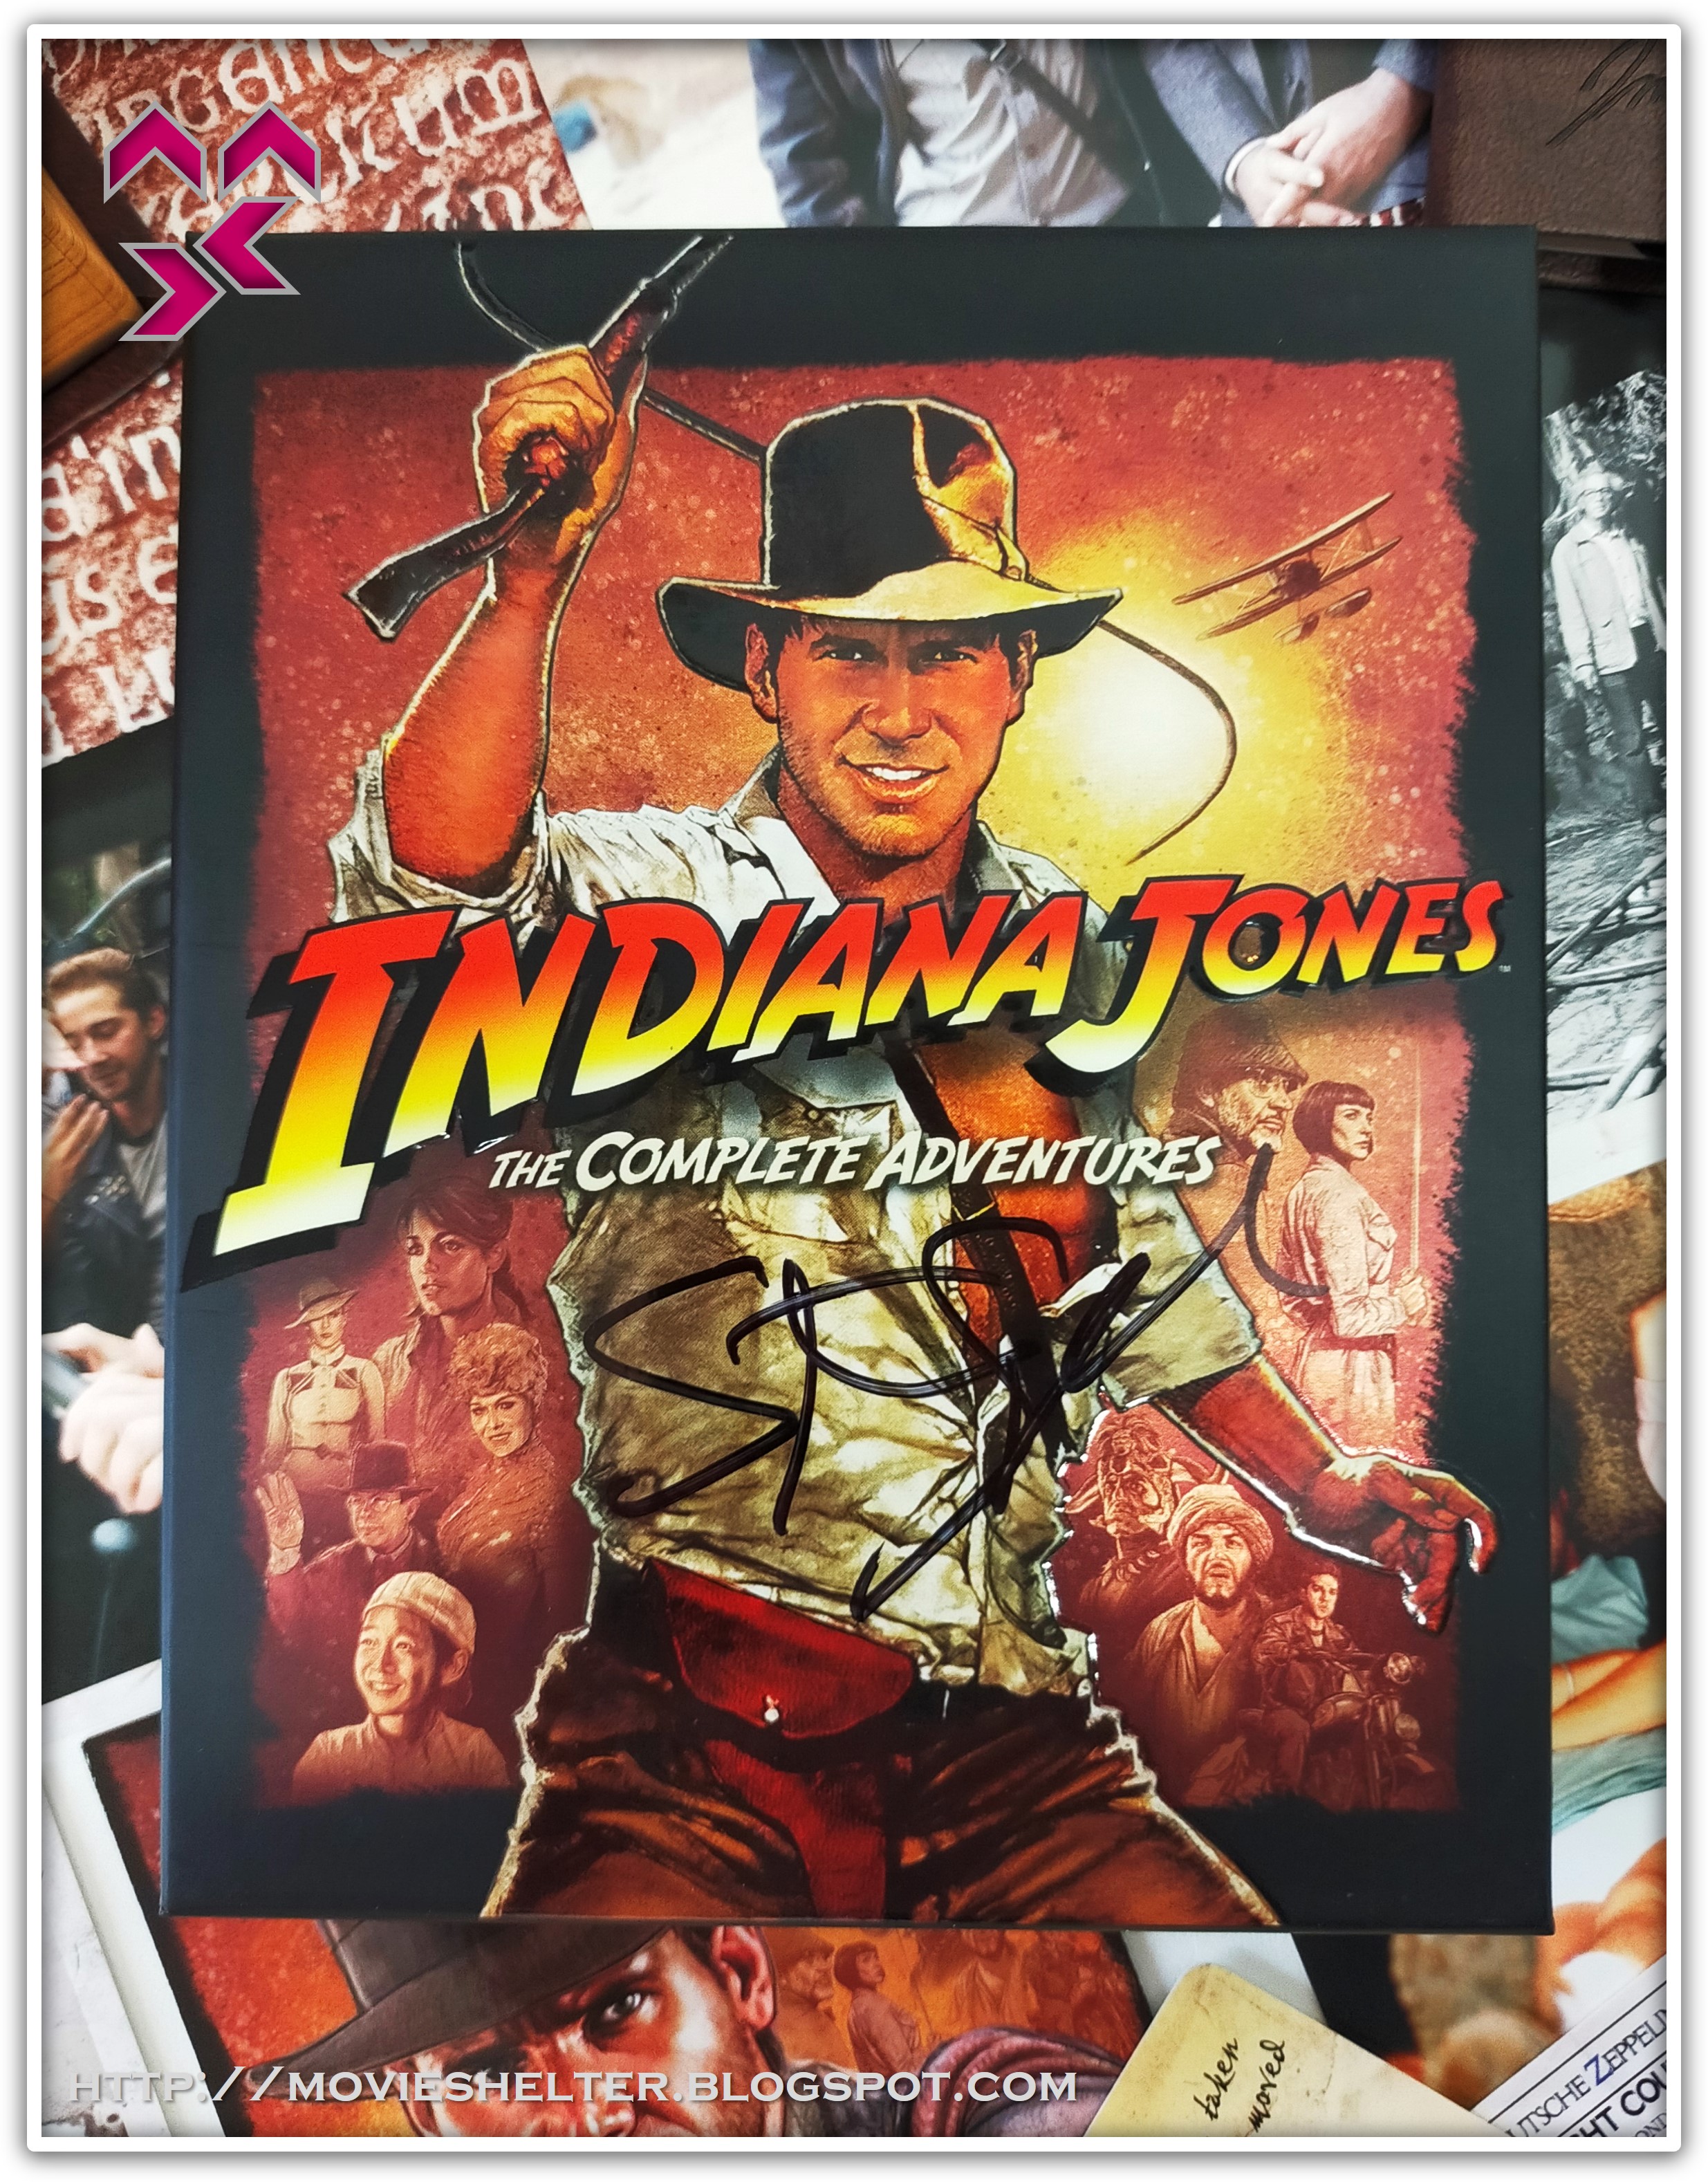 Indiana_Jones_The_Complete_Adventures_Limited_Edition_Collectors_Set_signed_by_Steven_Spielberg_01.jpg